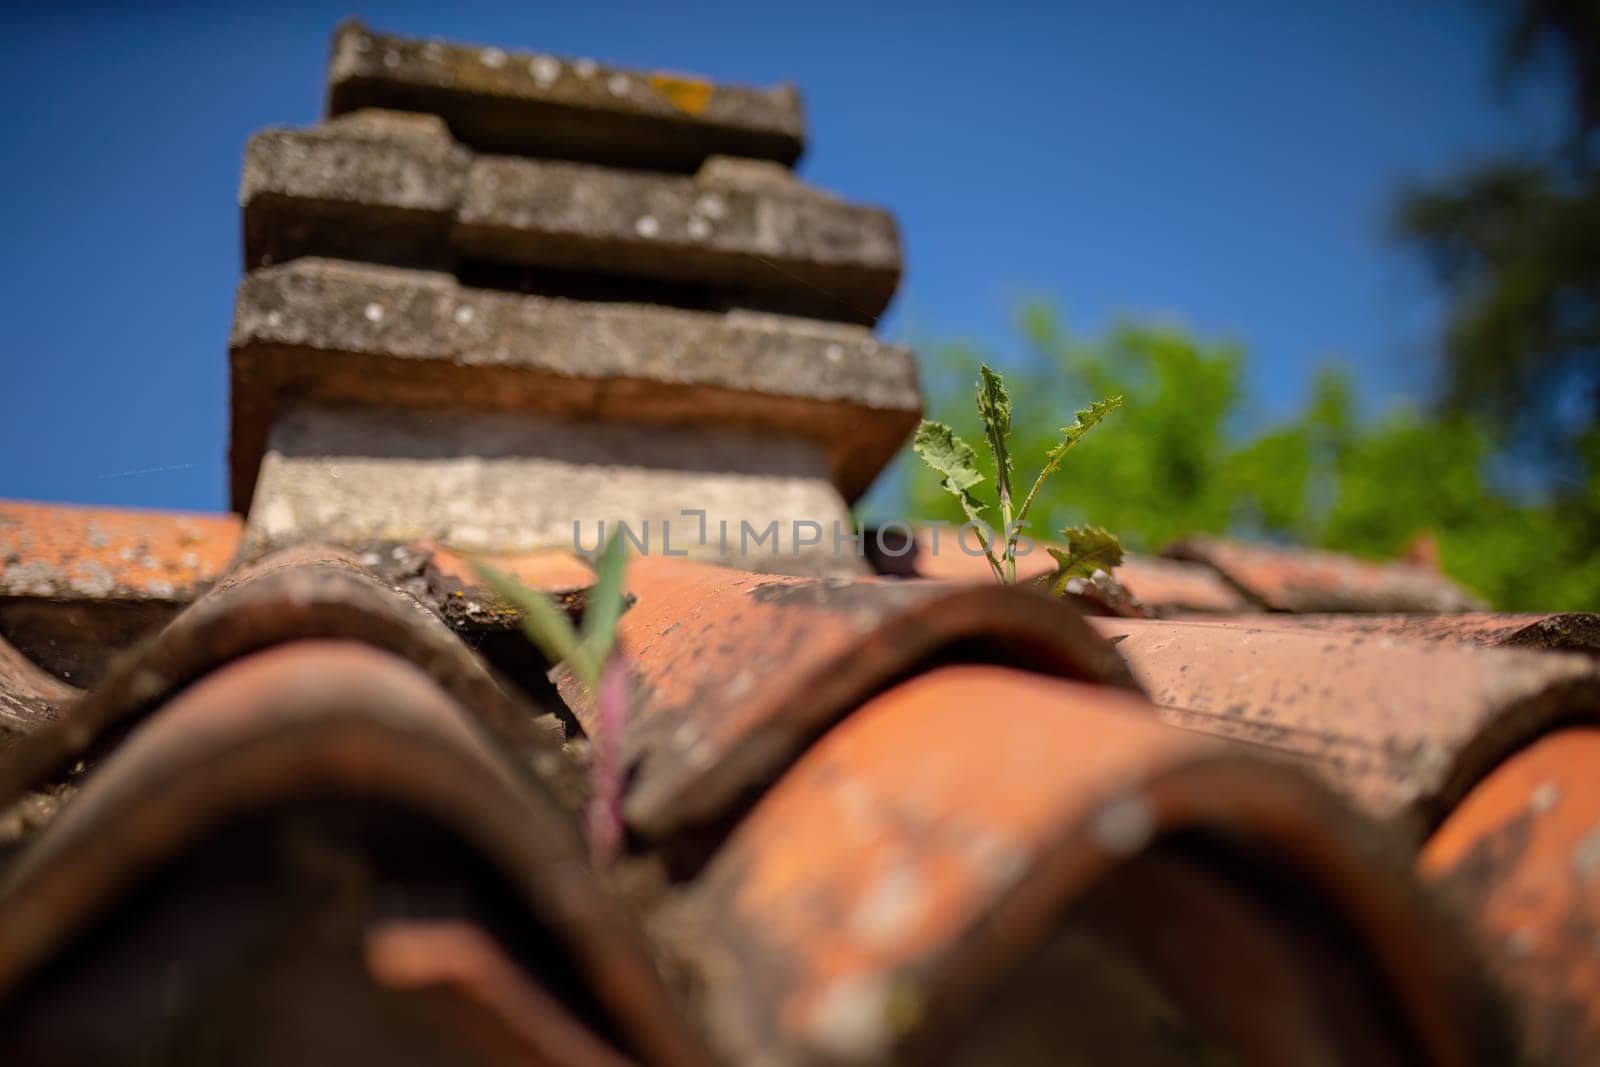 A small plant is thriving on top of a roof, showcasing natures ability to adapt and grow in unexpected places.